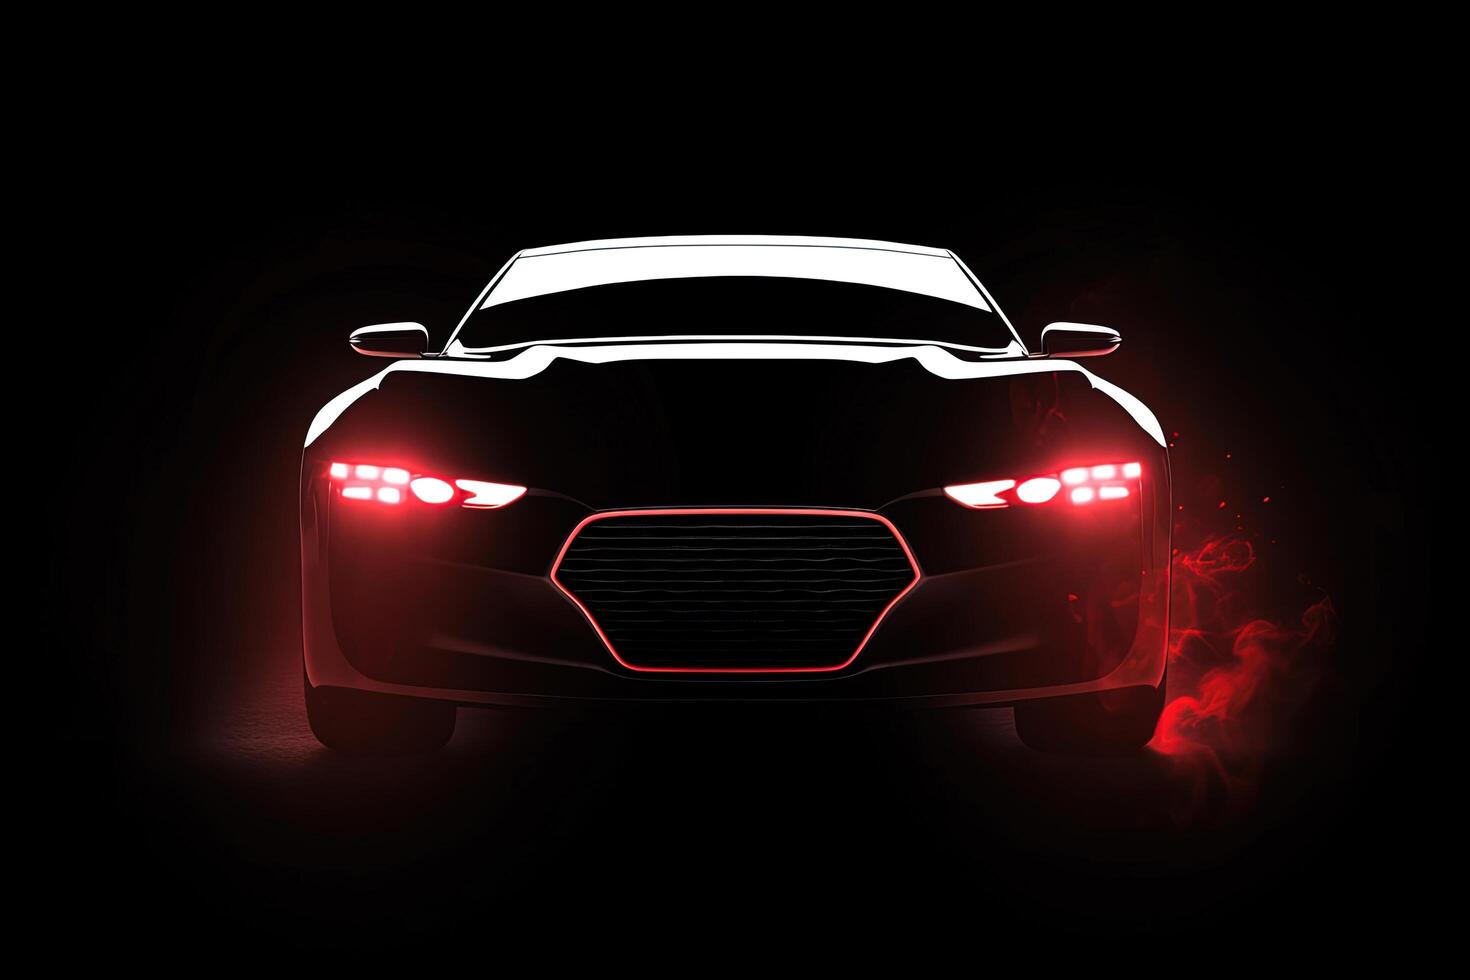 Front view dark silhouette of a modern luxury red car isolated on dark background with red neon light and smoke. photo